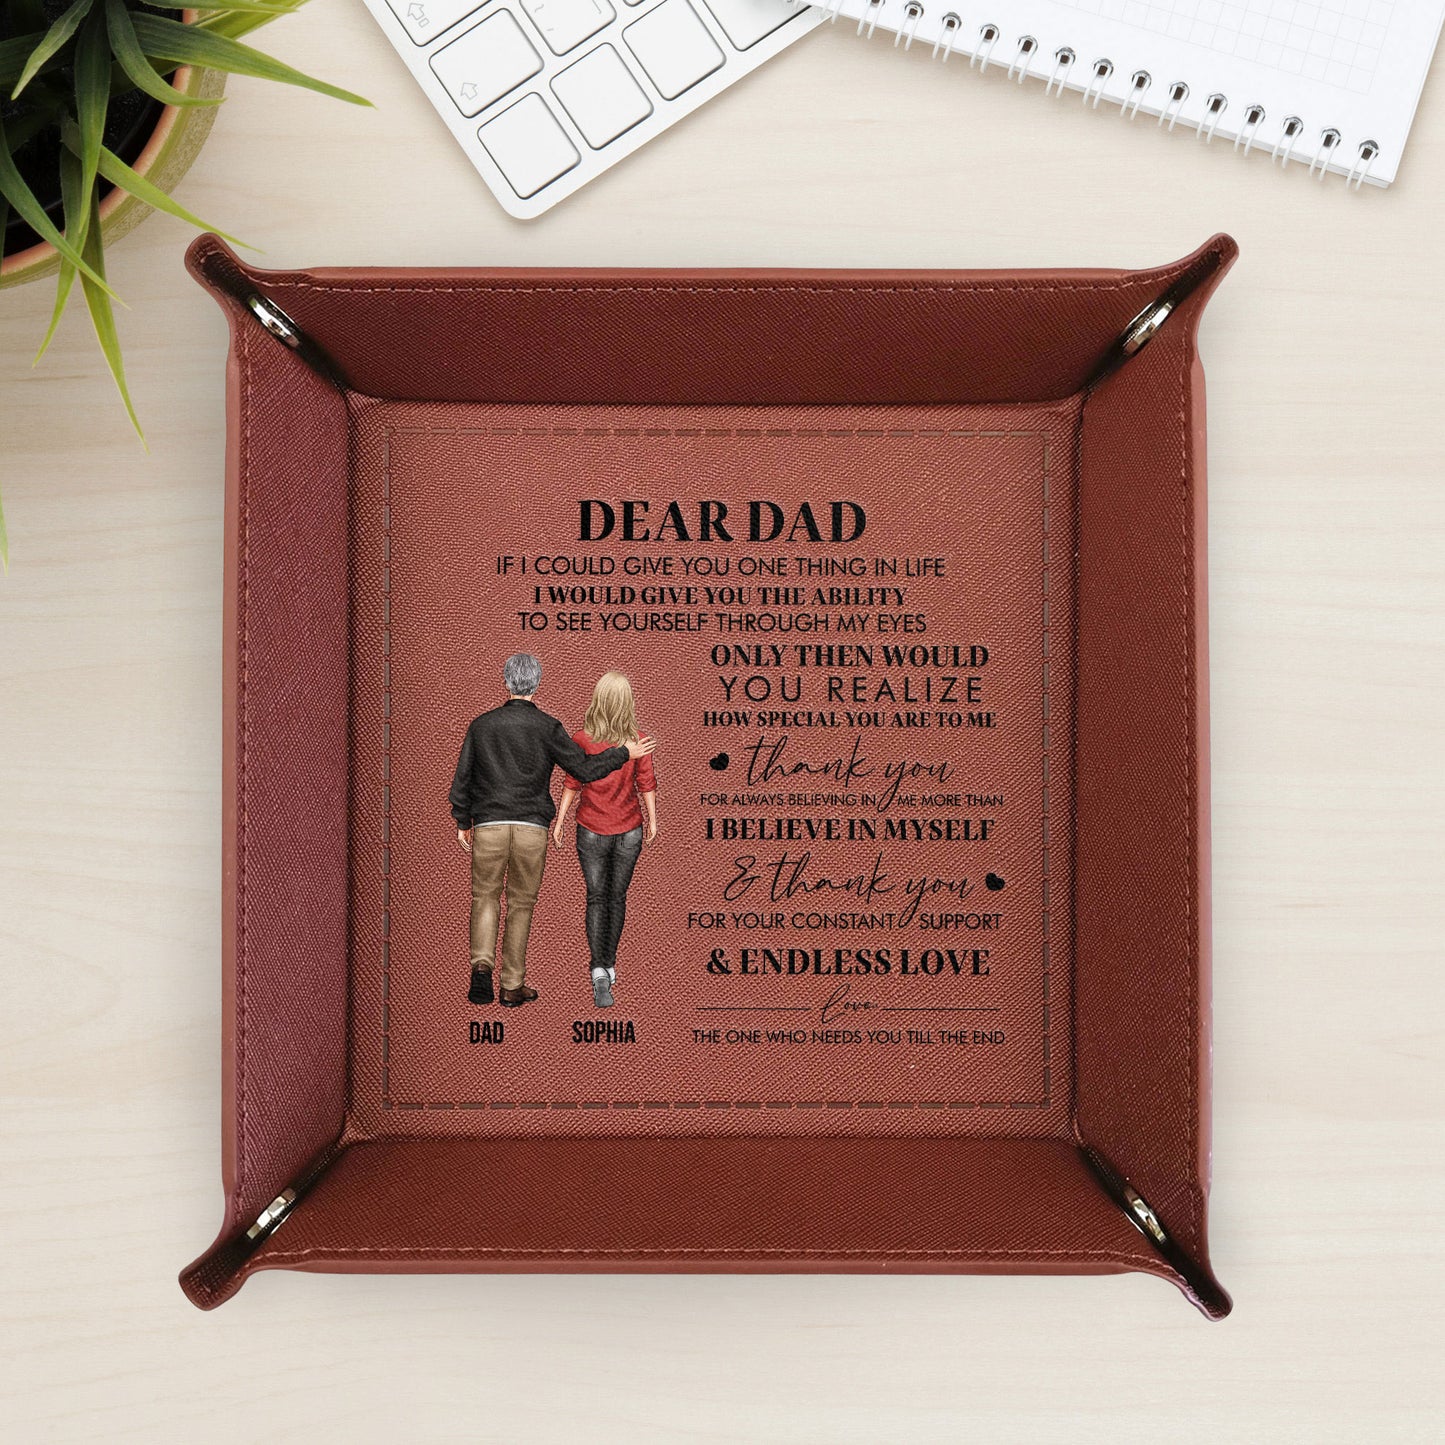 Thank You For Your Constant Support - Personalized Leather Valet Tray